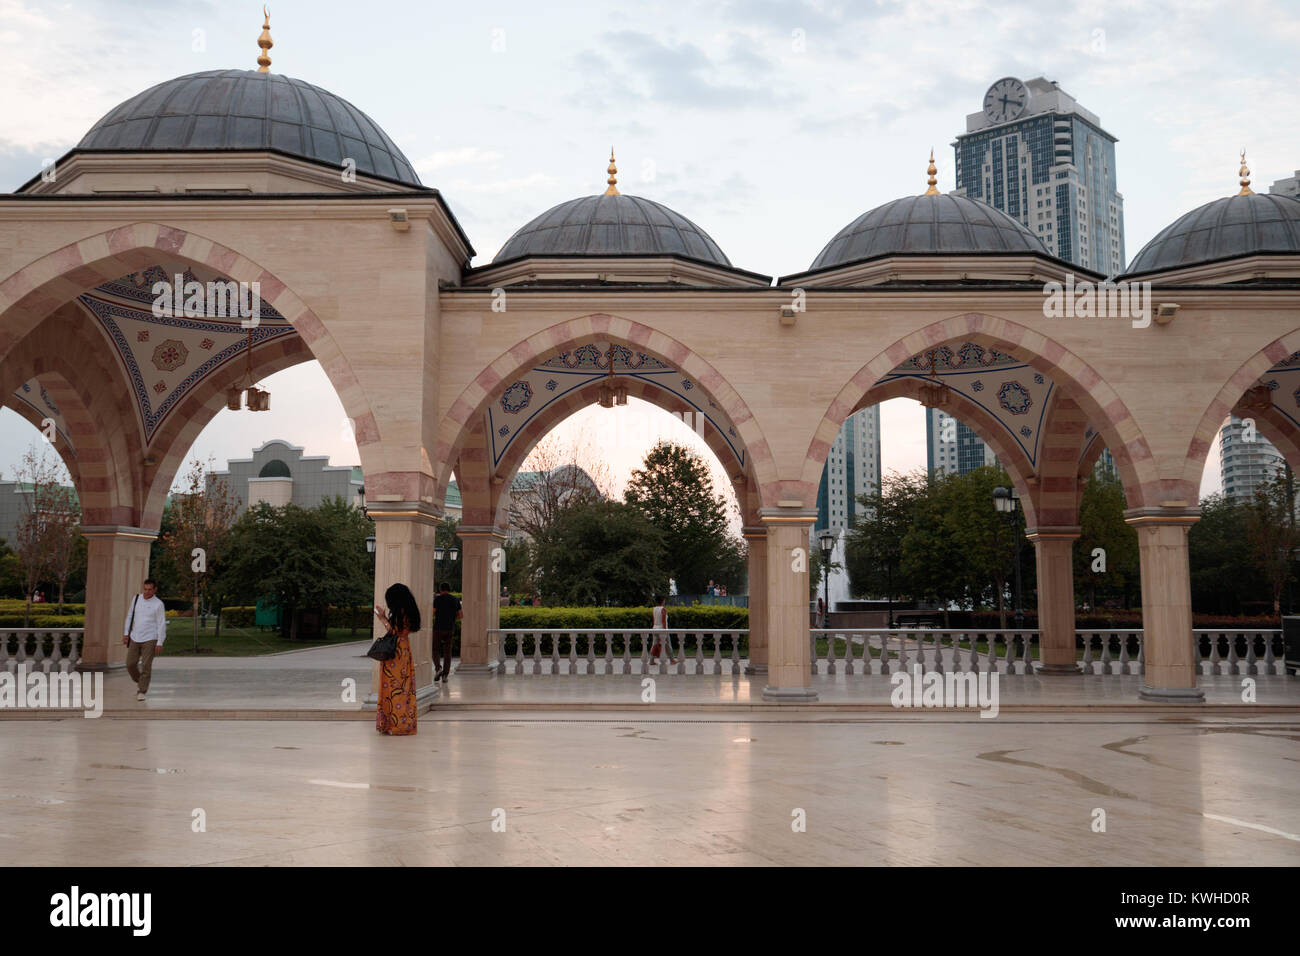 The Heart of Chechnya Mosque courtyard, Grozny, evening time Stock Photo